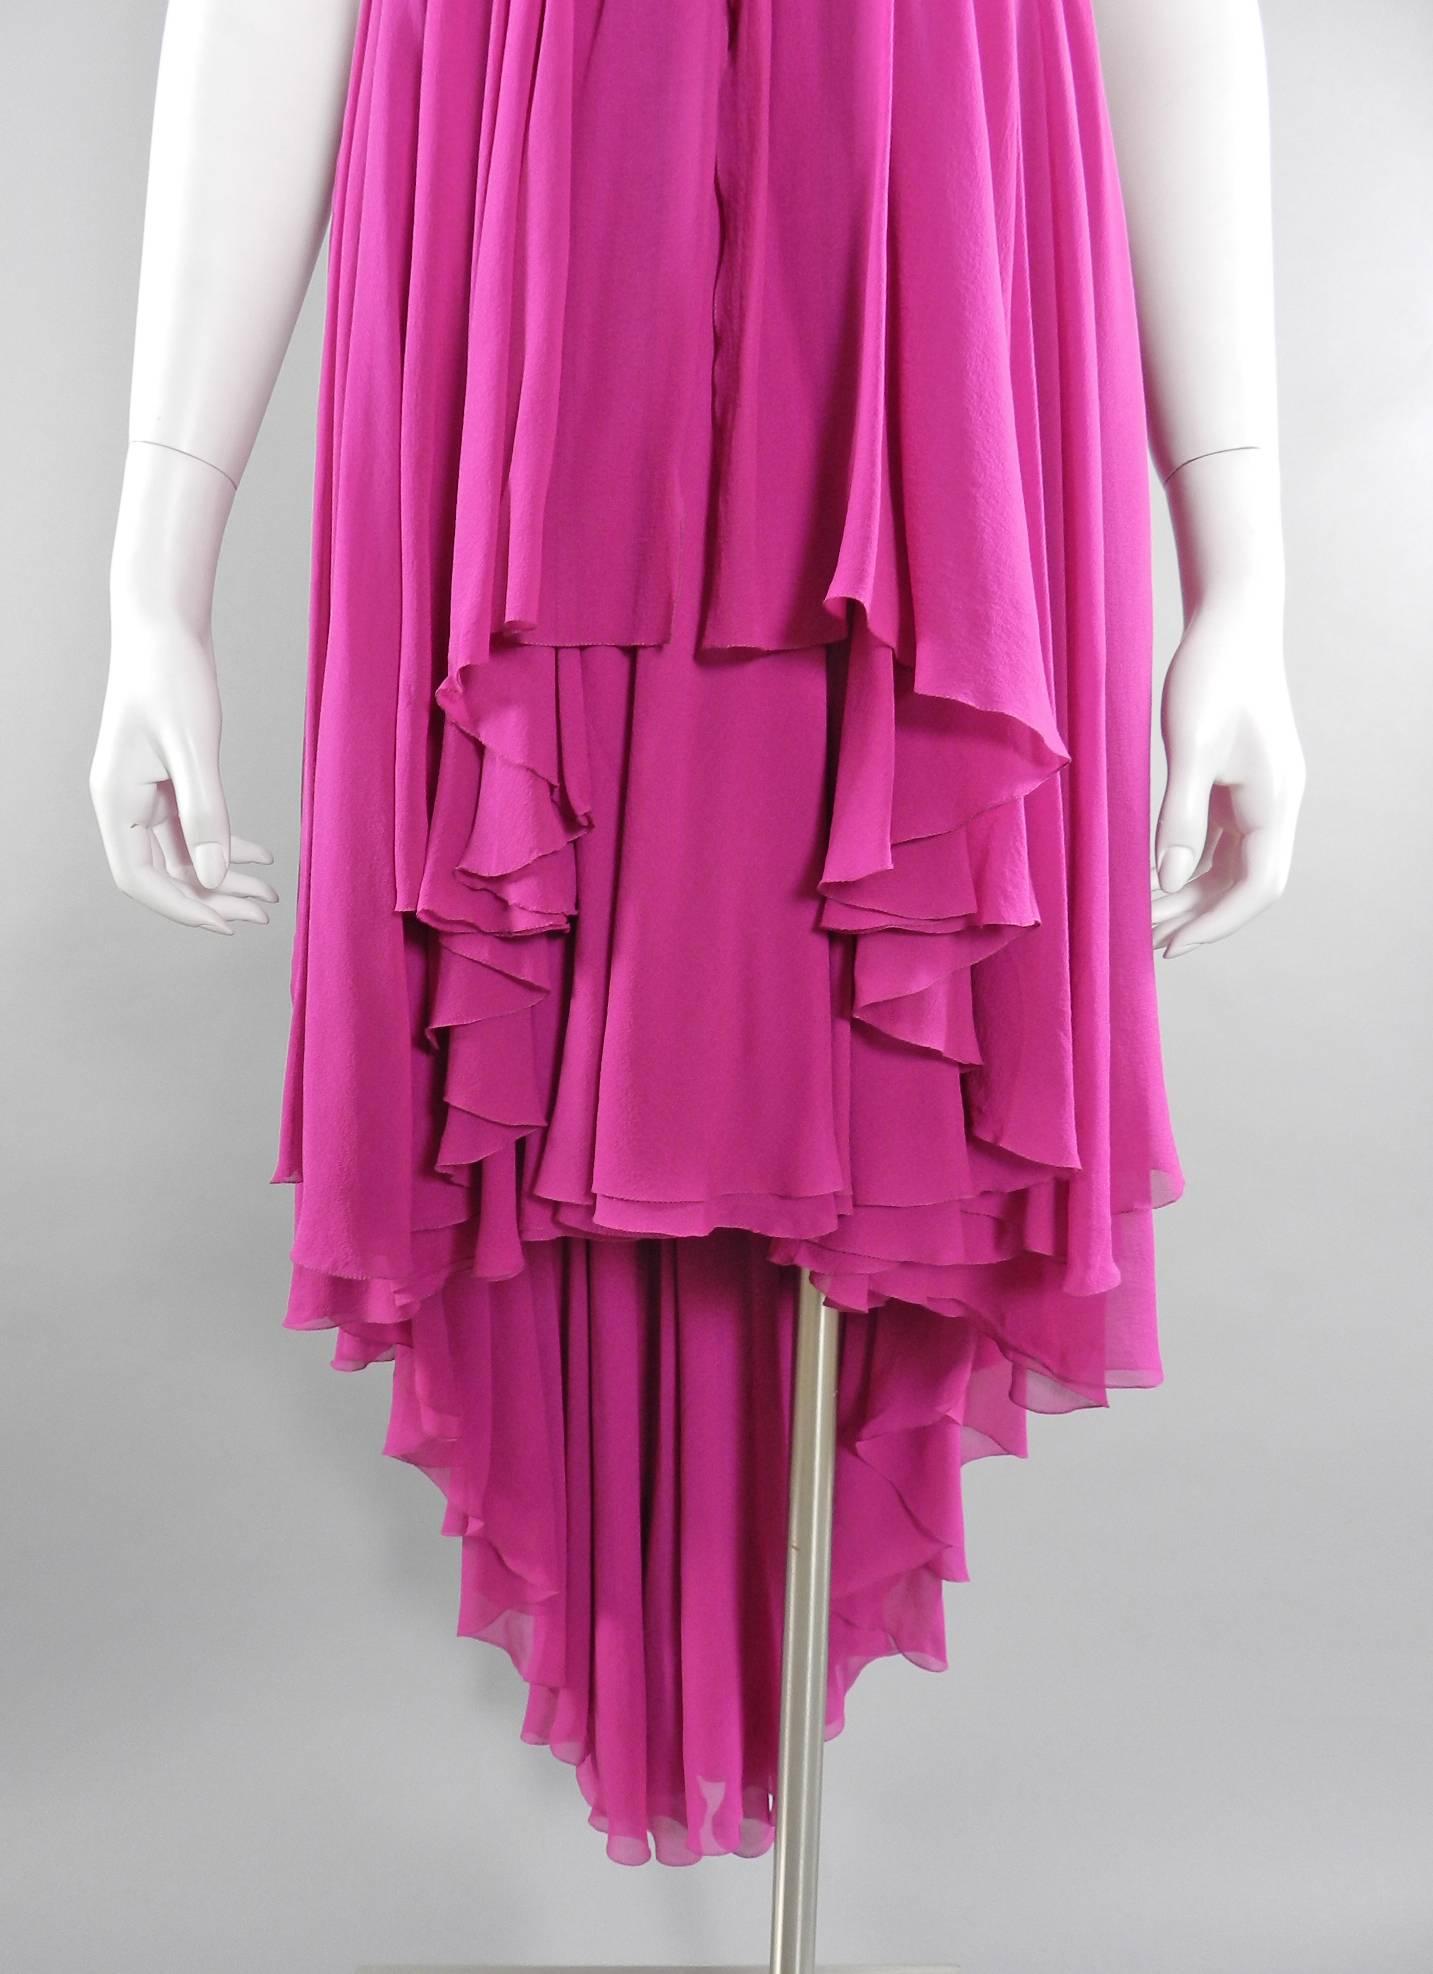 Karl Lagerfeld vintage 1985 Fuchsia and Ivory Strapless Silk cocktail Dress.  Ivory boned bodice with ruched silk, layered vibrant fuchsia silk chiffon skirt, covered buttons at back. Excellent clean condition.  Front has shorter cocktail mini